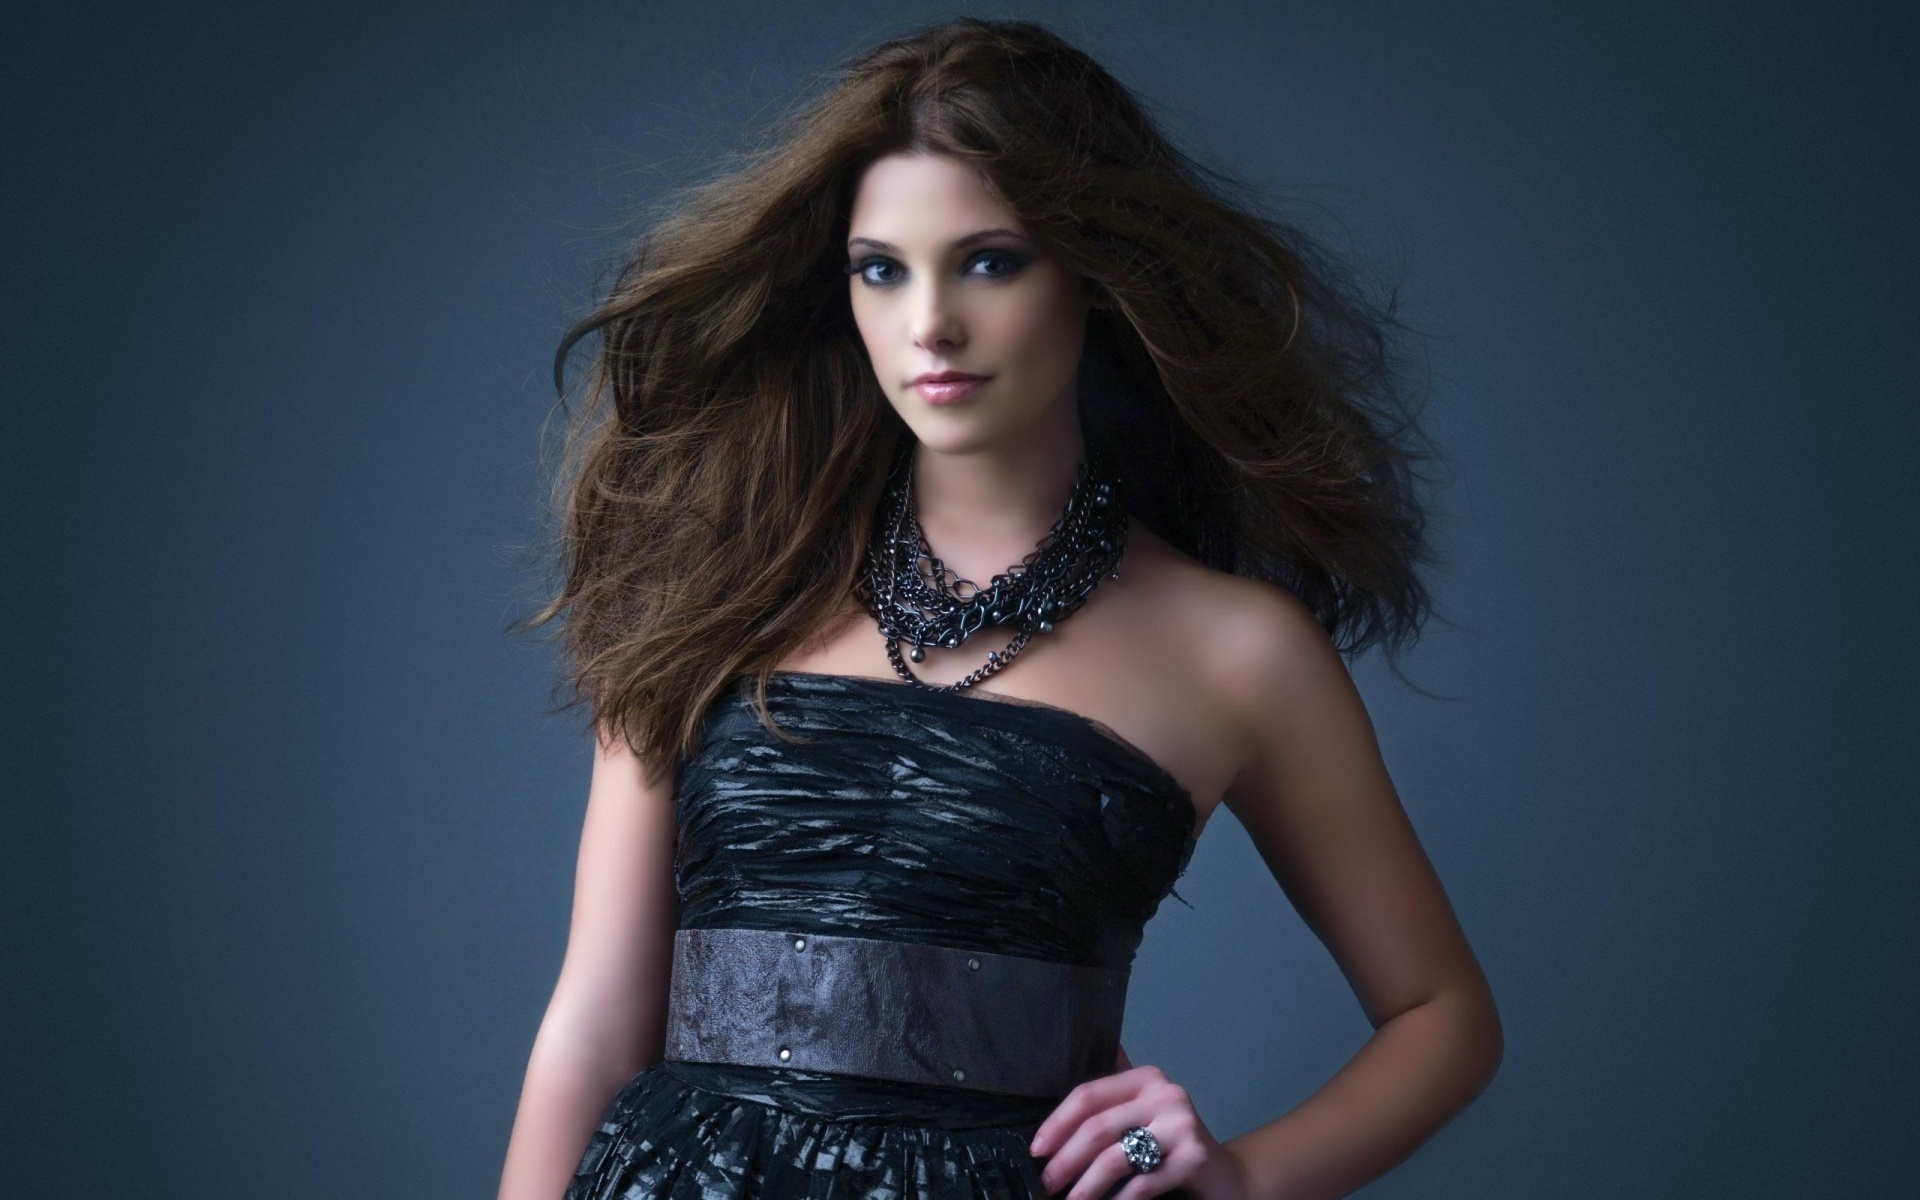 Ashley Greene Look for 1920 x 1200 widescreen resolution